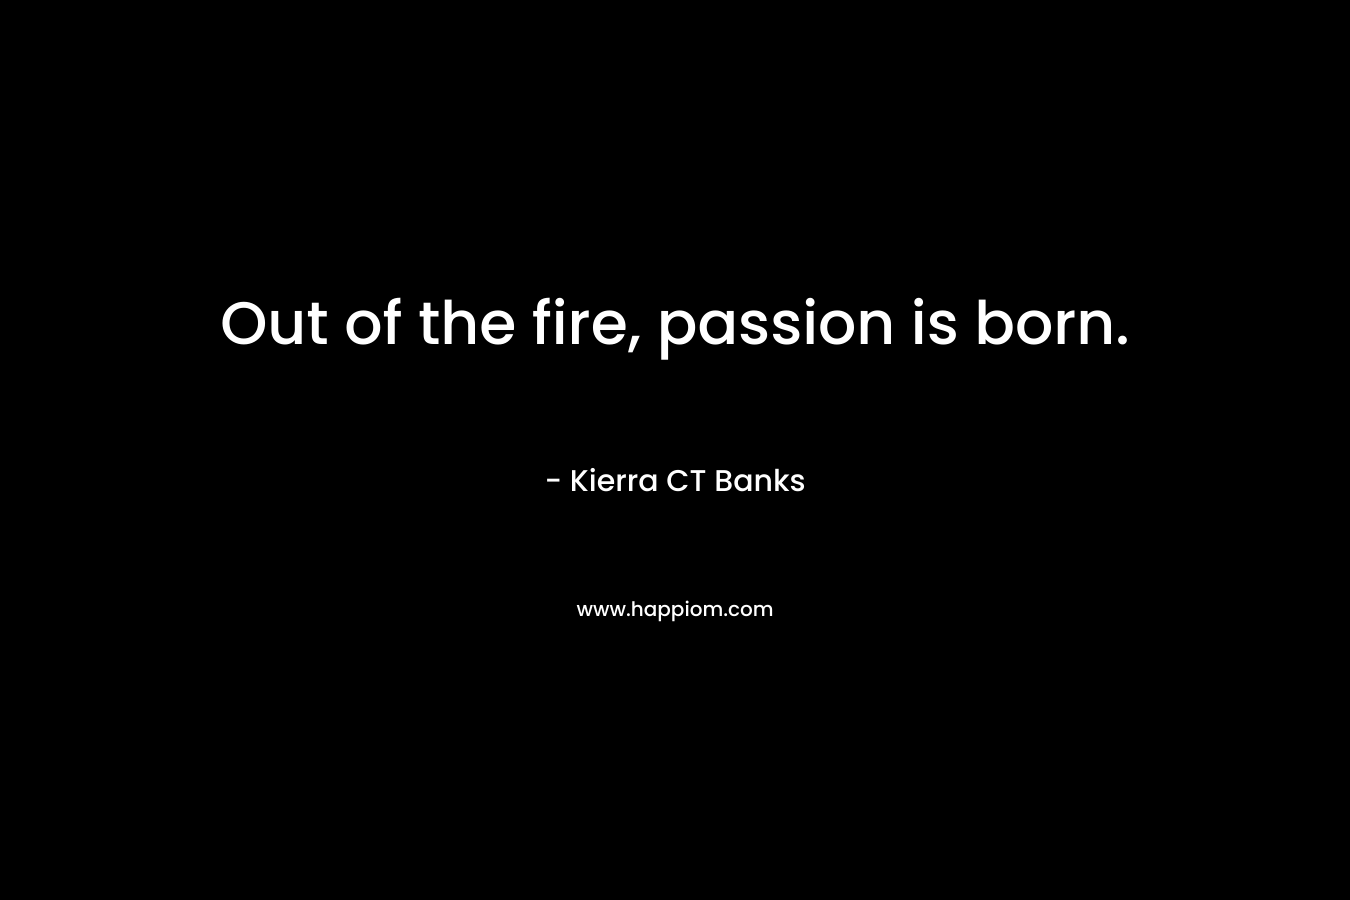 Out of the fire, passion is born.